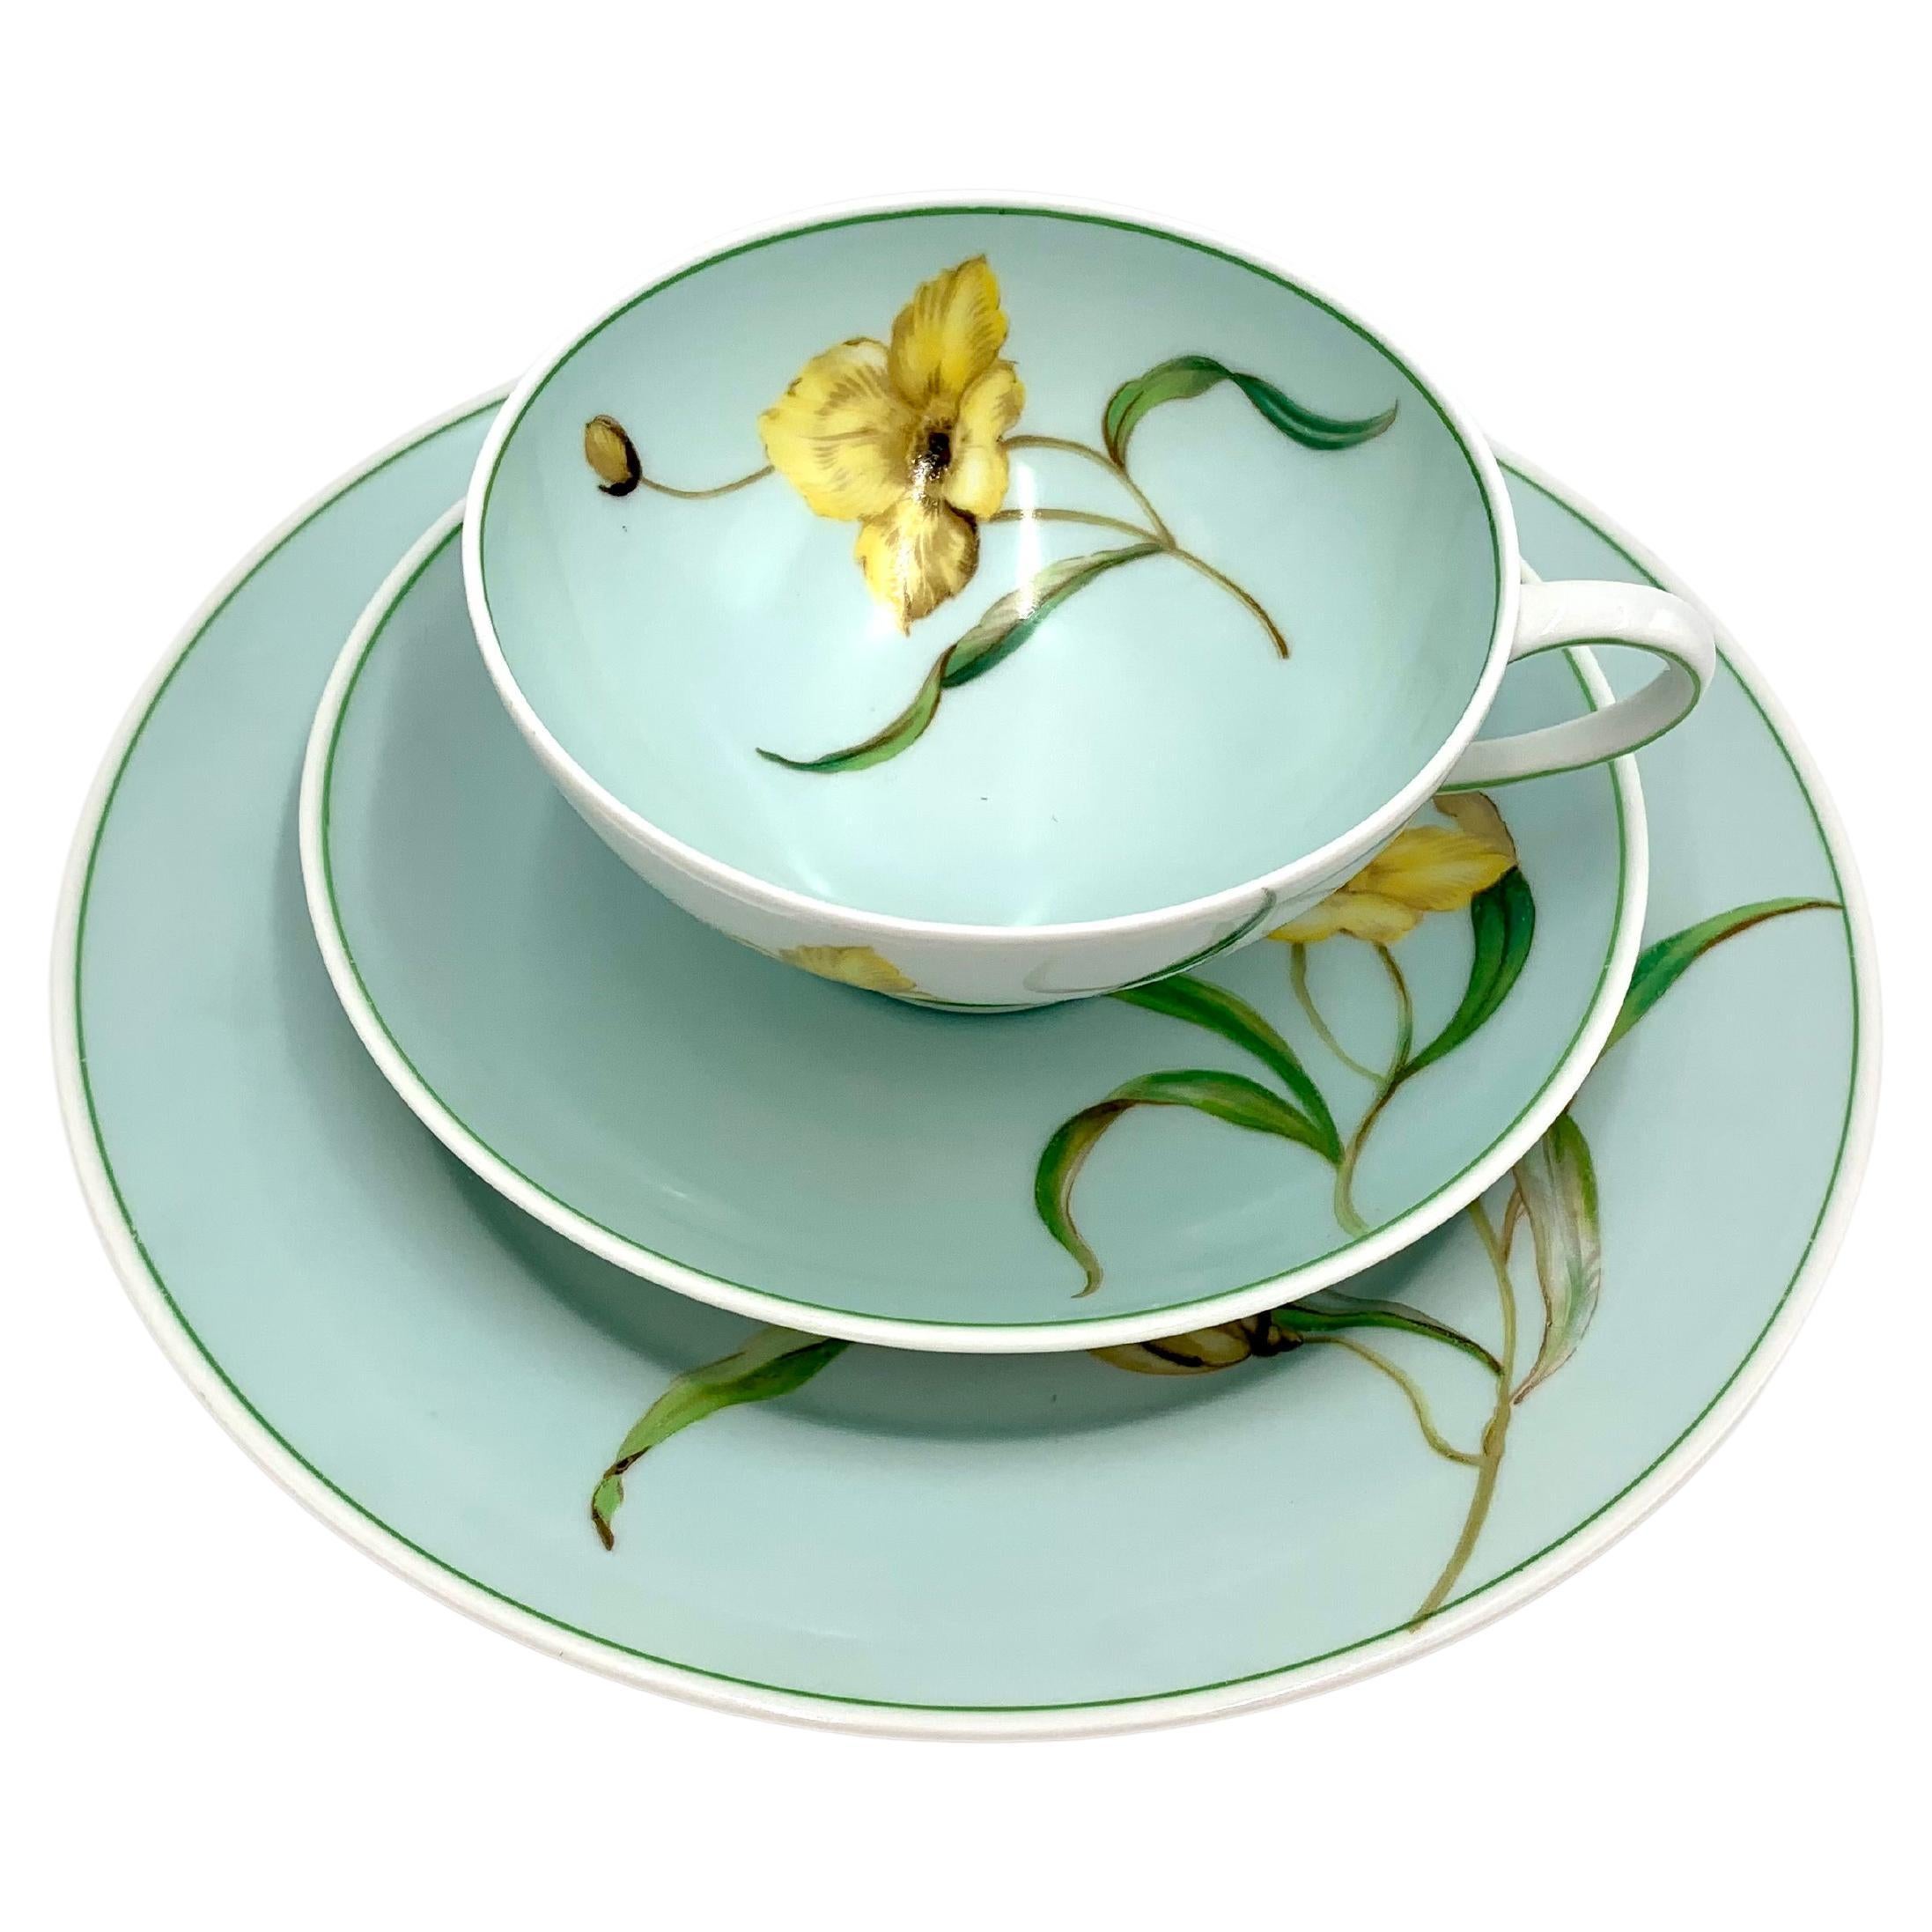 Porcelain Cup with Daffodil Rosenthal, Breakfast Set, Germany